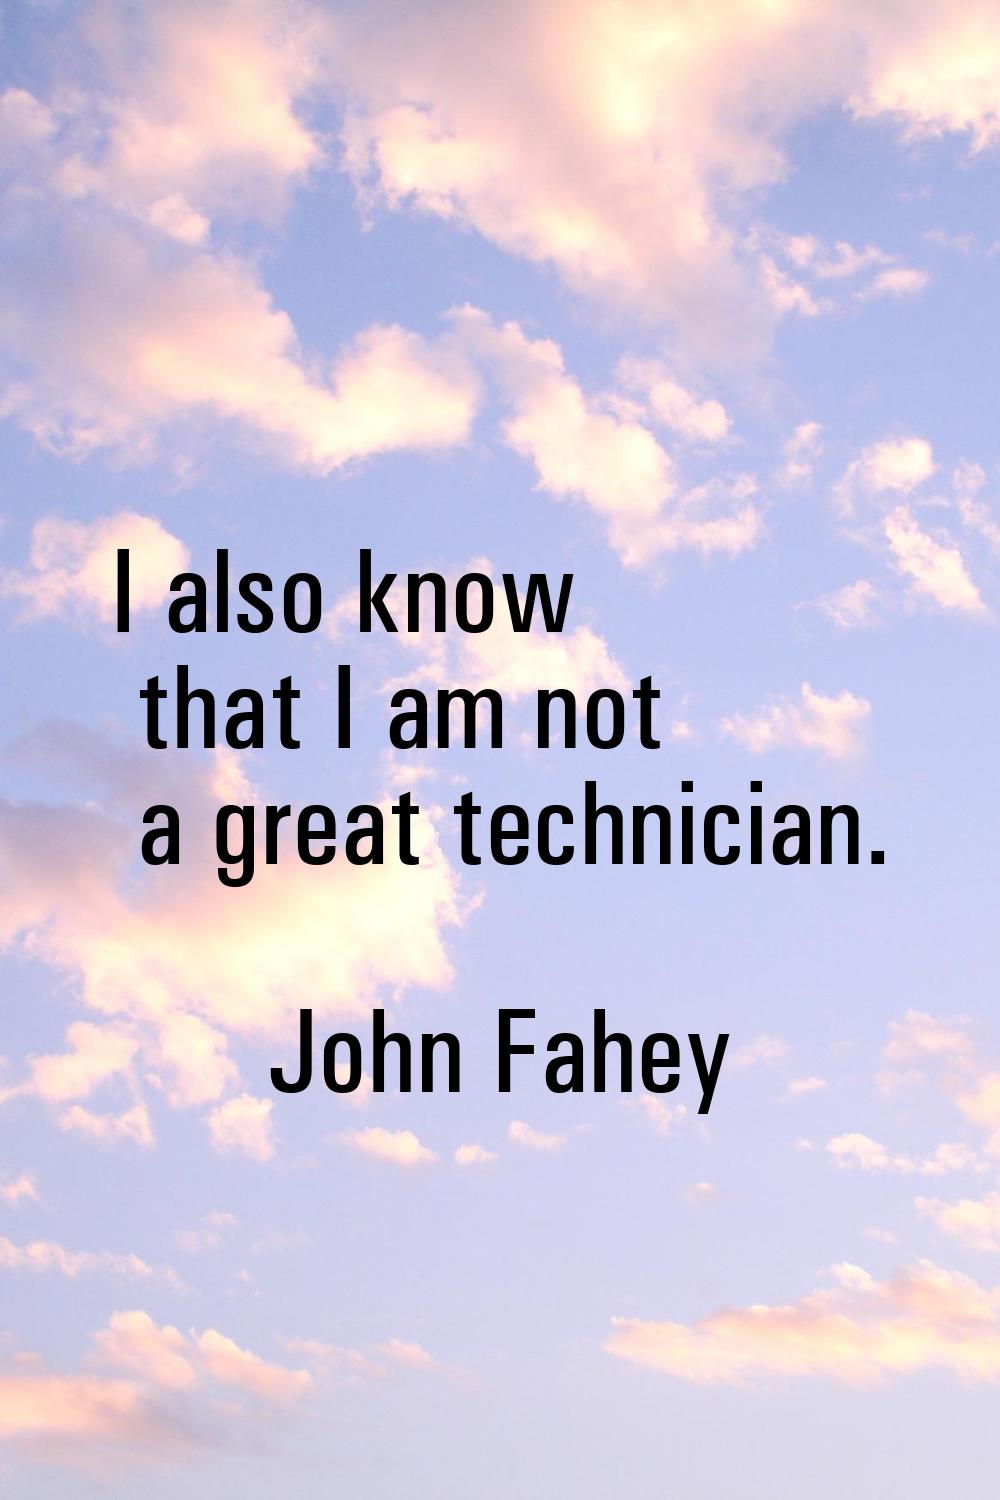 I also know that I am not a great technician.